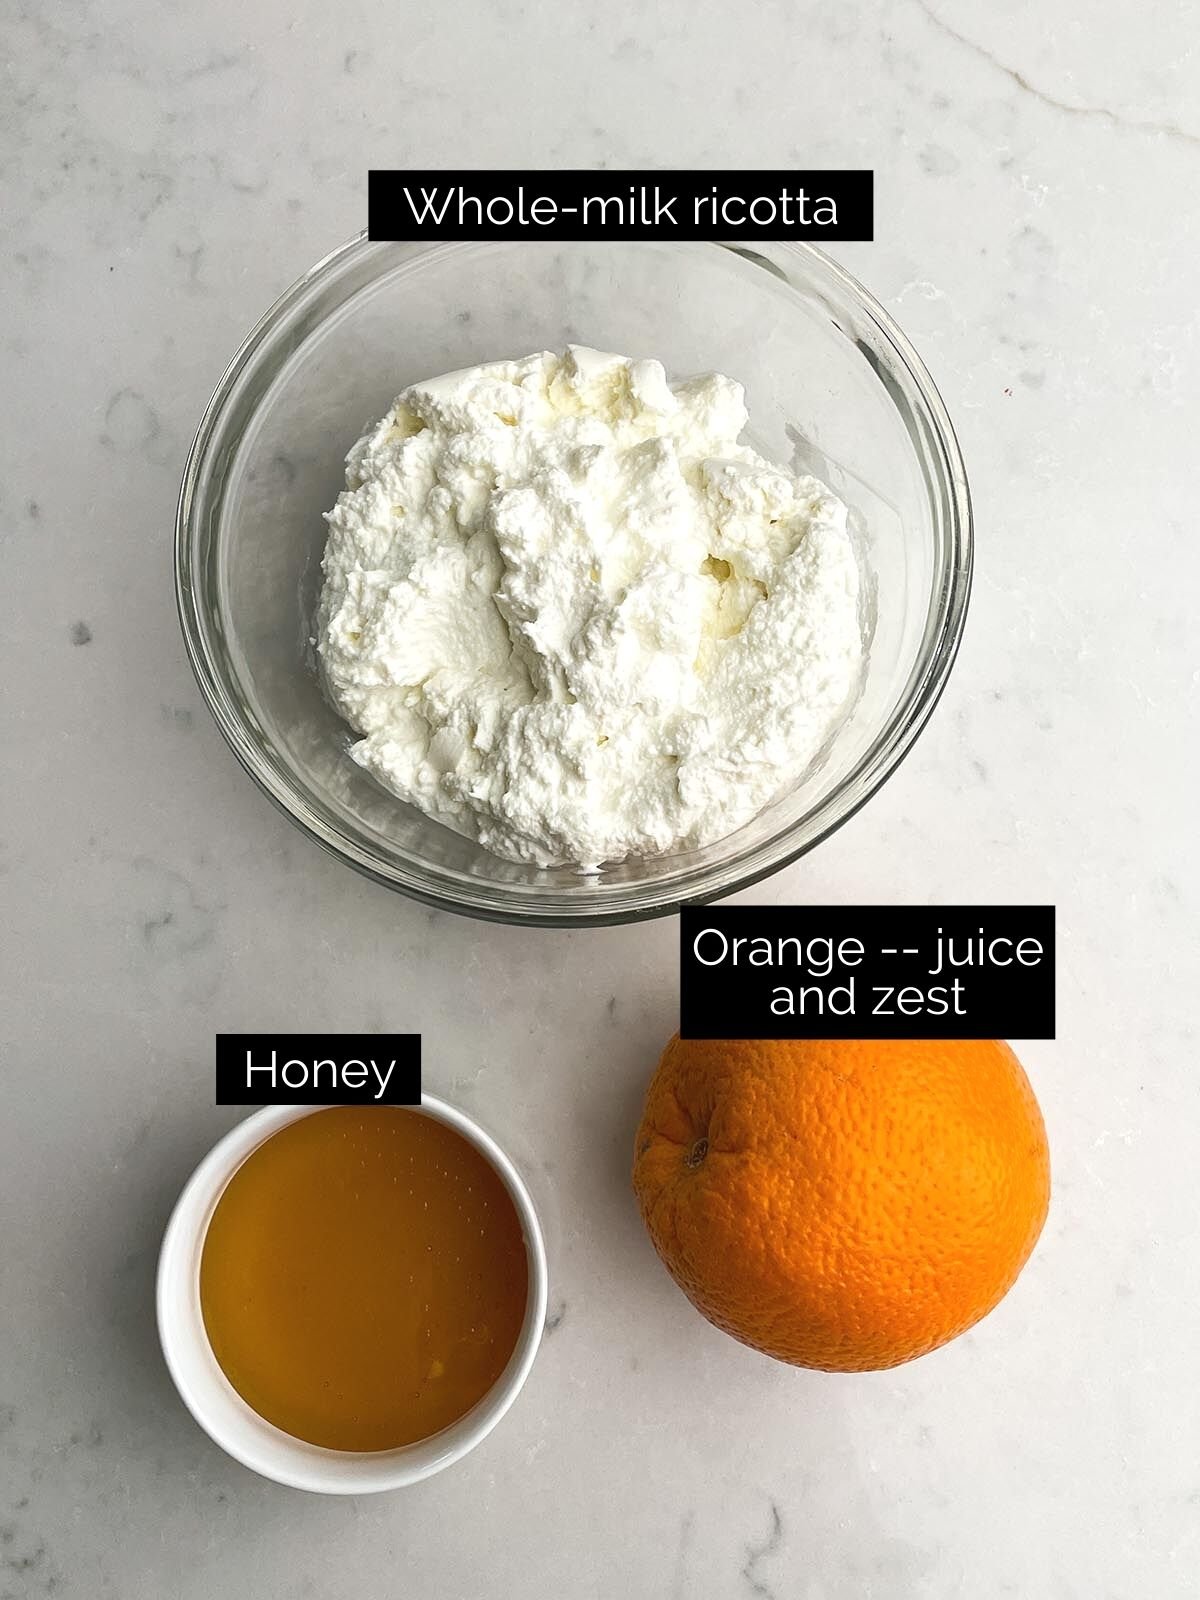 Whipped ricotta ingredients on white countertop.